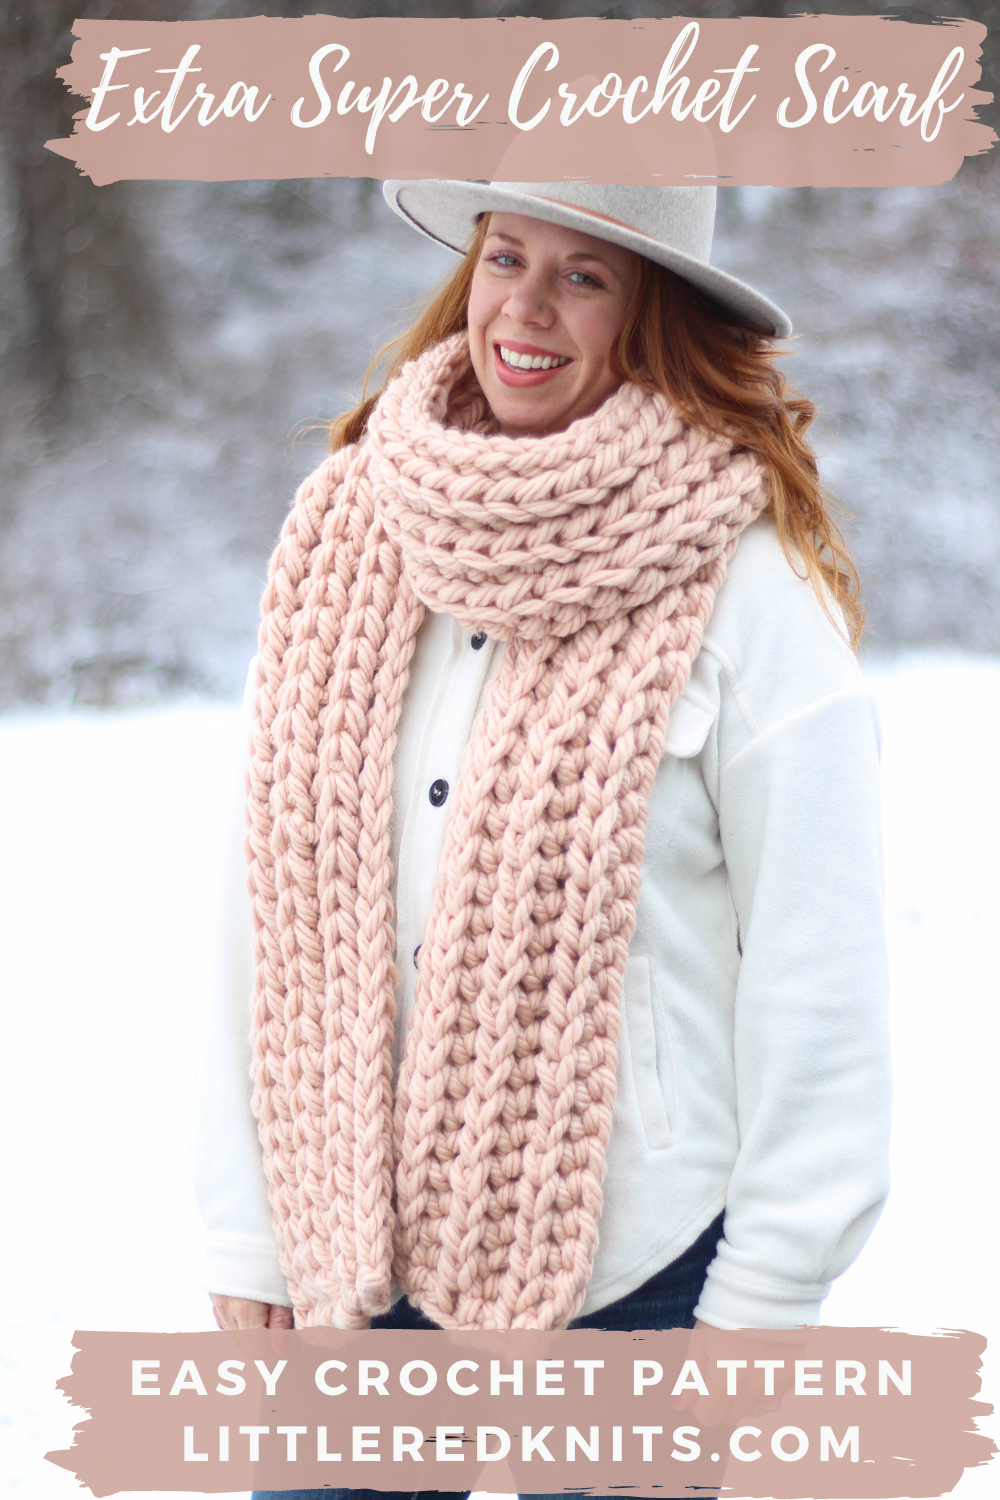 8 Crochet Stitches for Making Warm Scarves - Easy Crochet Patterns